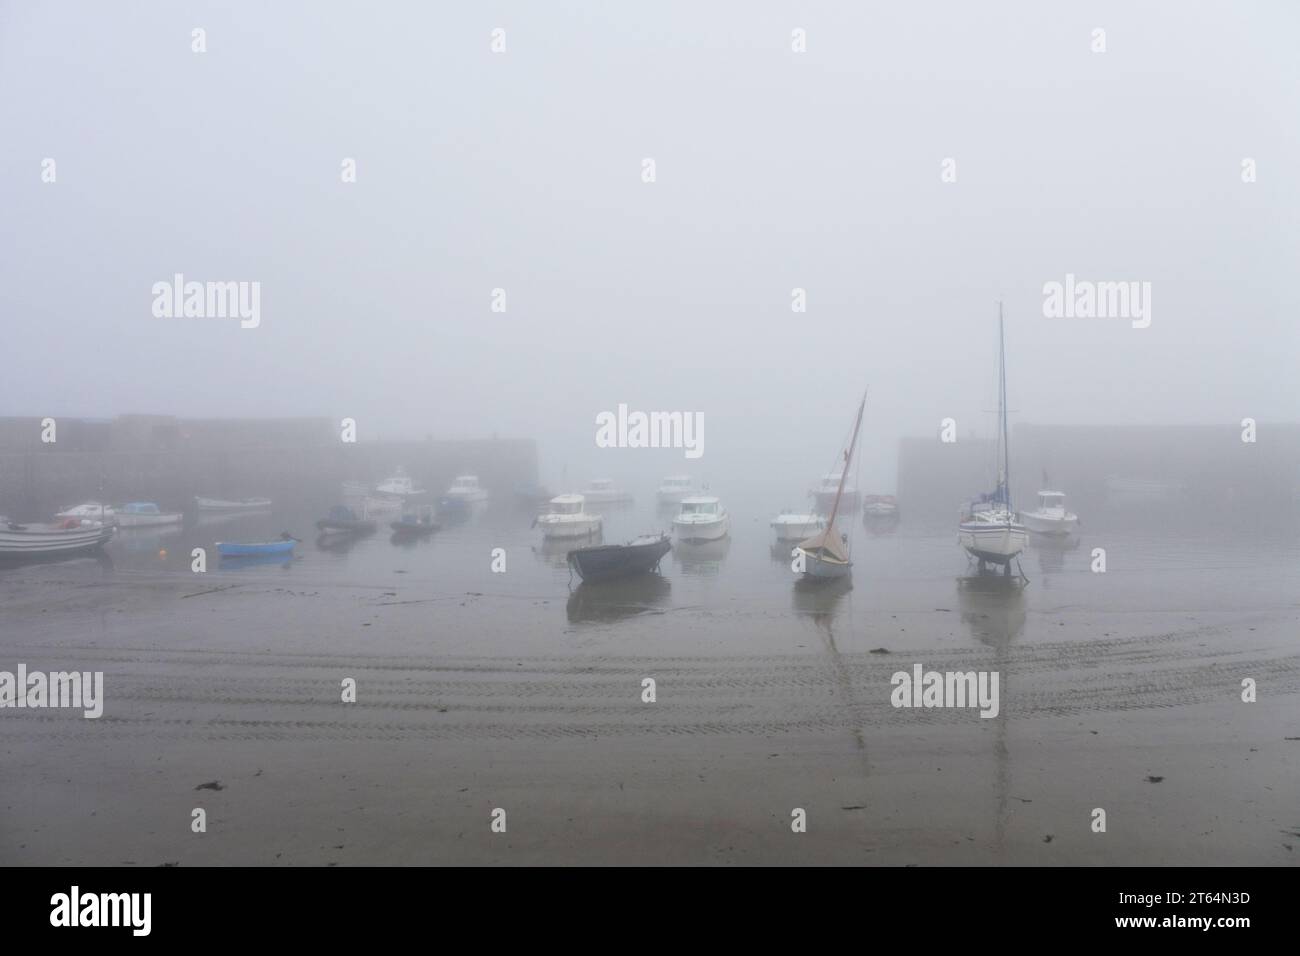 Foggy conditions at the harbour of St. Michael's Mount, Cornwall, UK - John Gollop Stock Photo